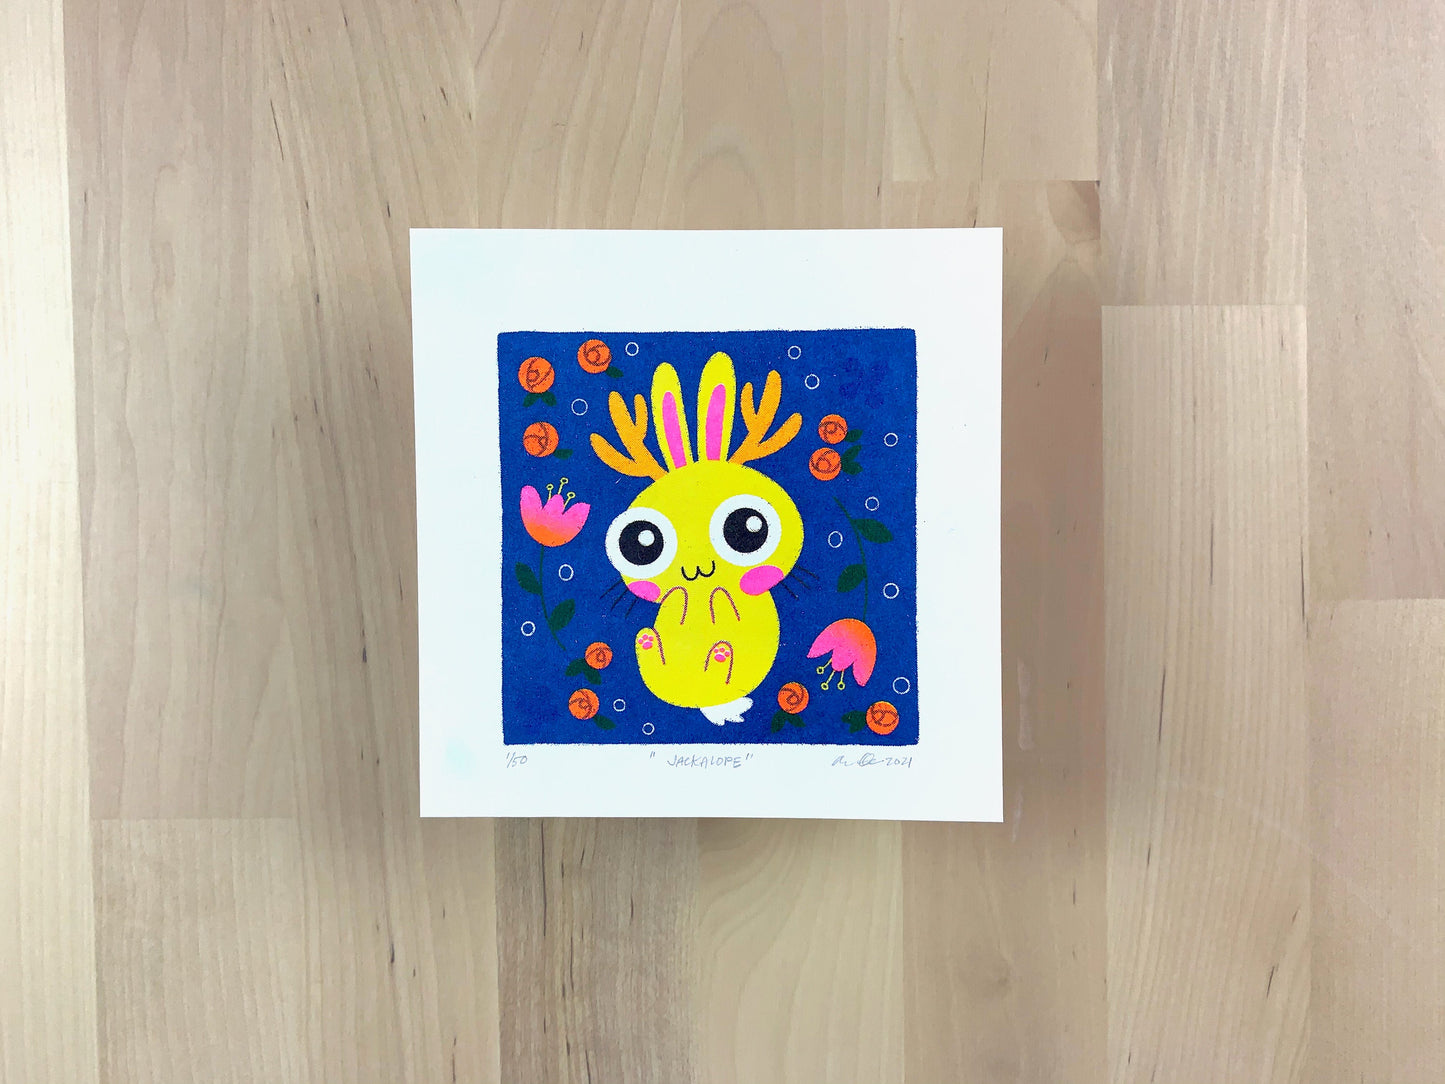 Risograph print of a cute yellow jackalope bunny illustration on blue background and flowers.